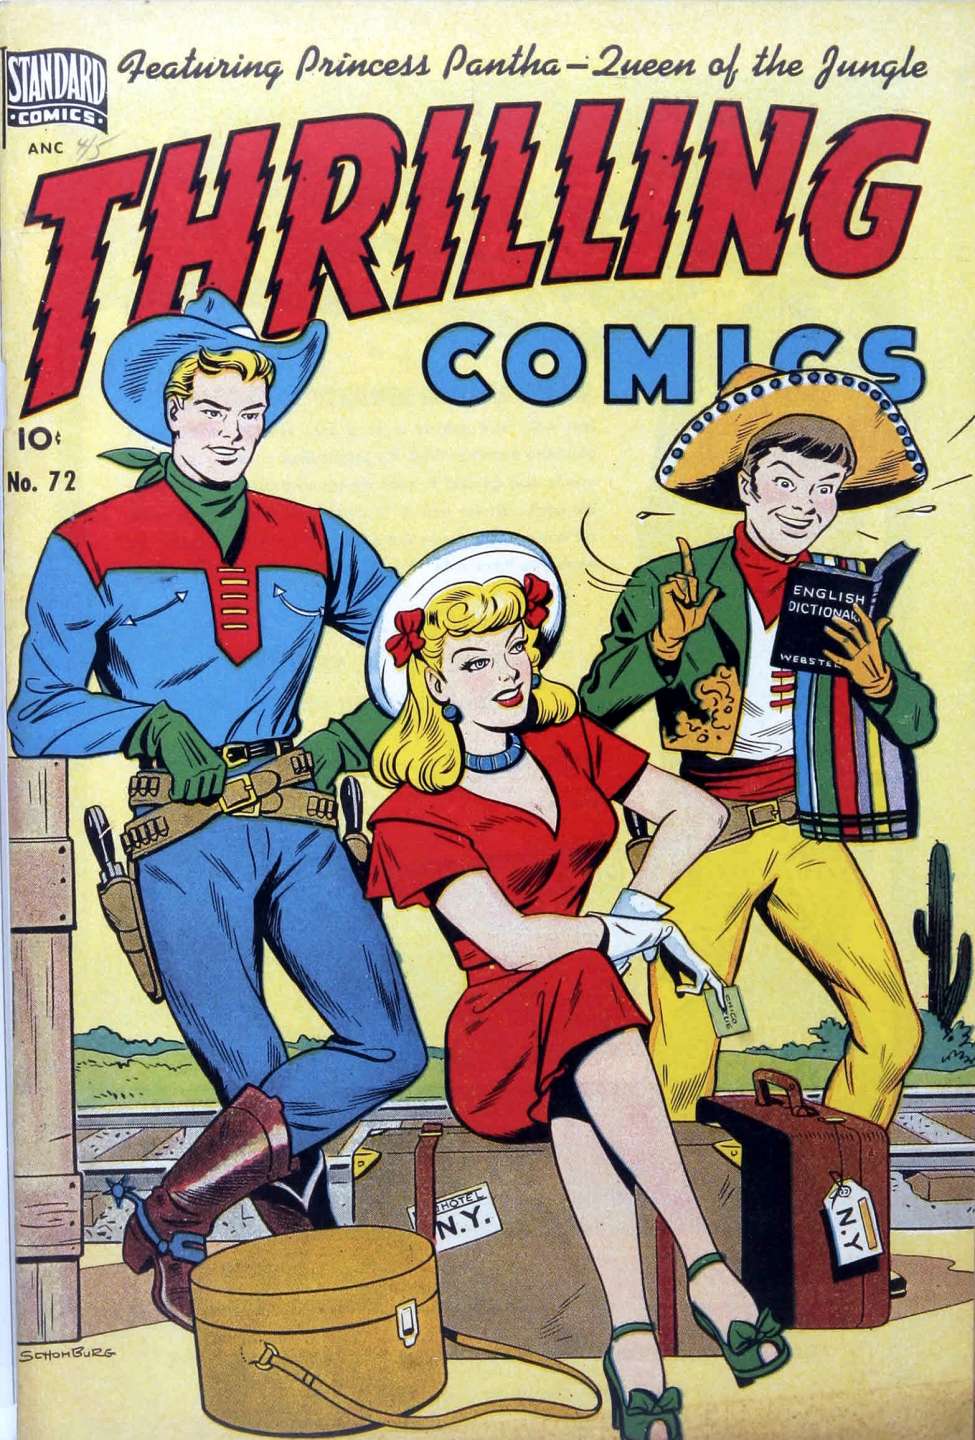 Book Cover For Thrilling Comics 72 (alt) - Version 2